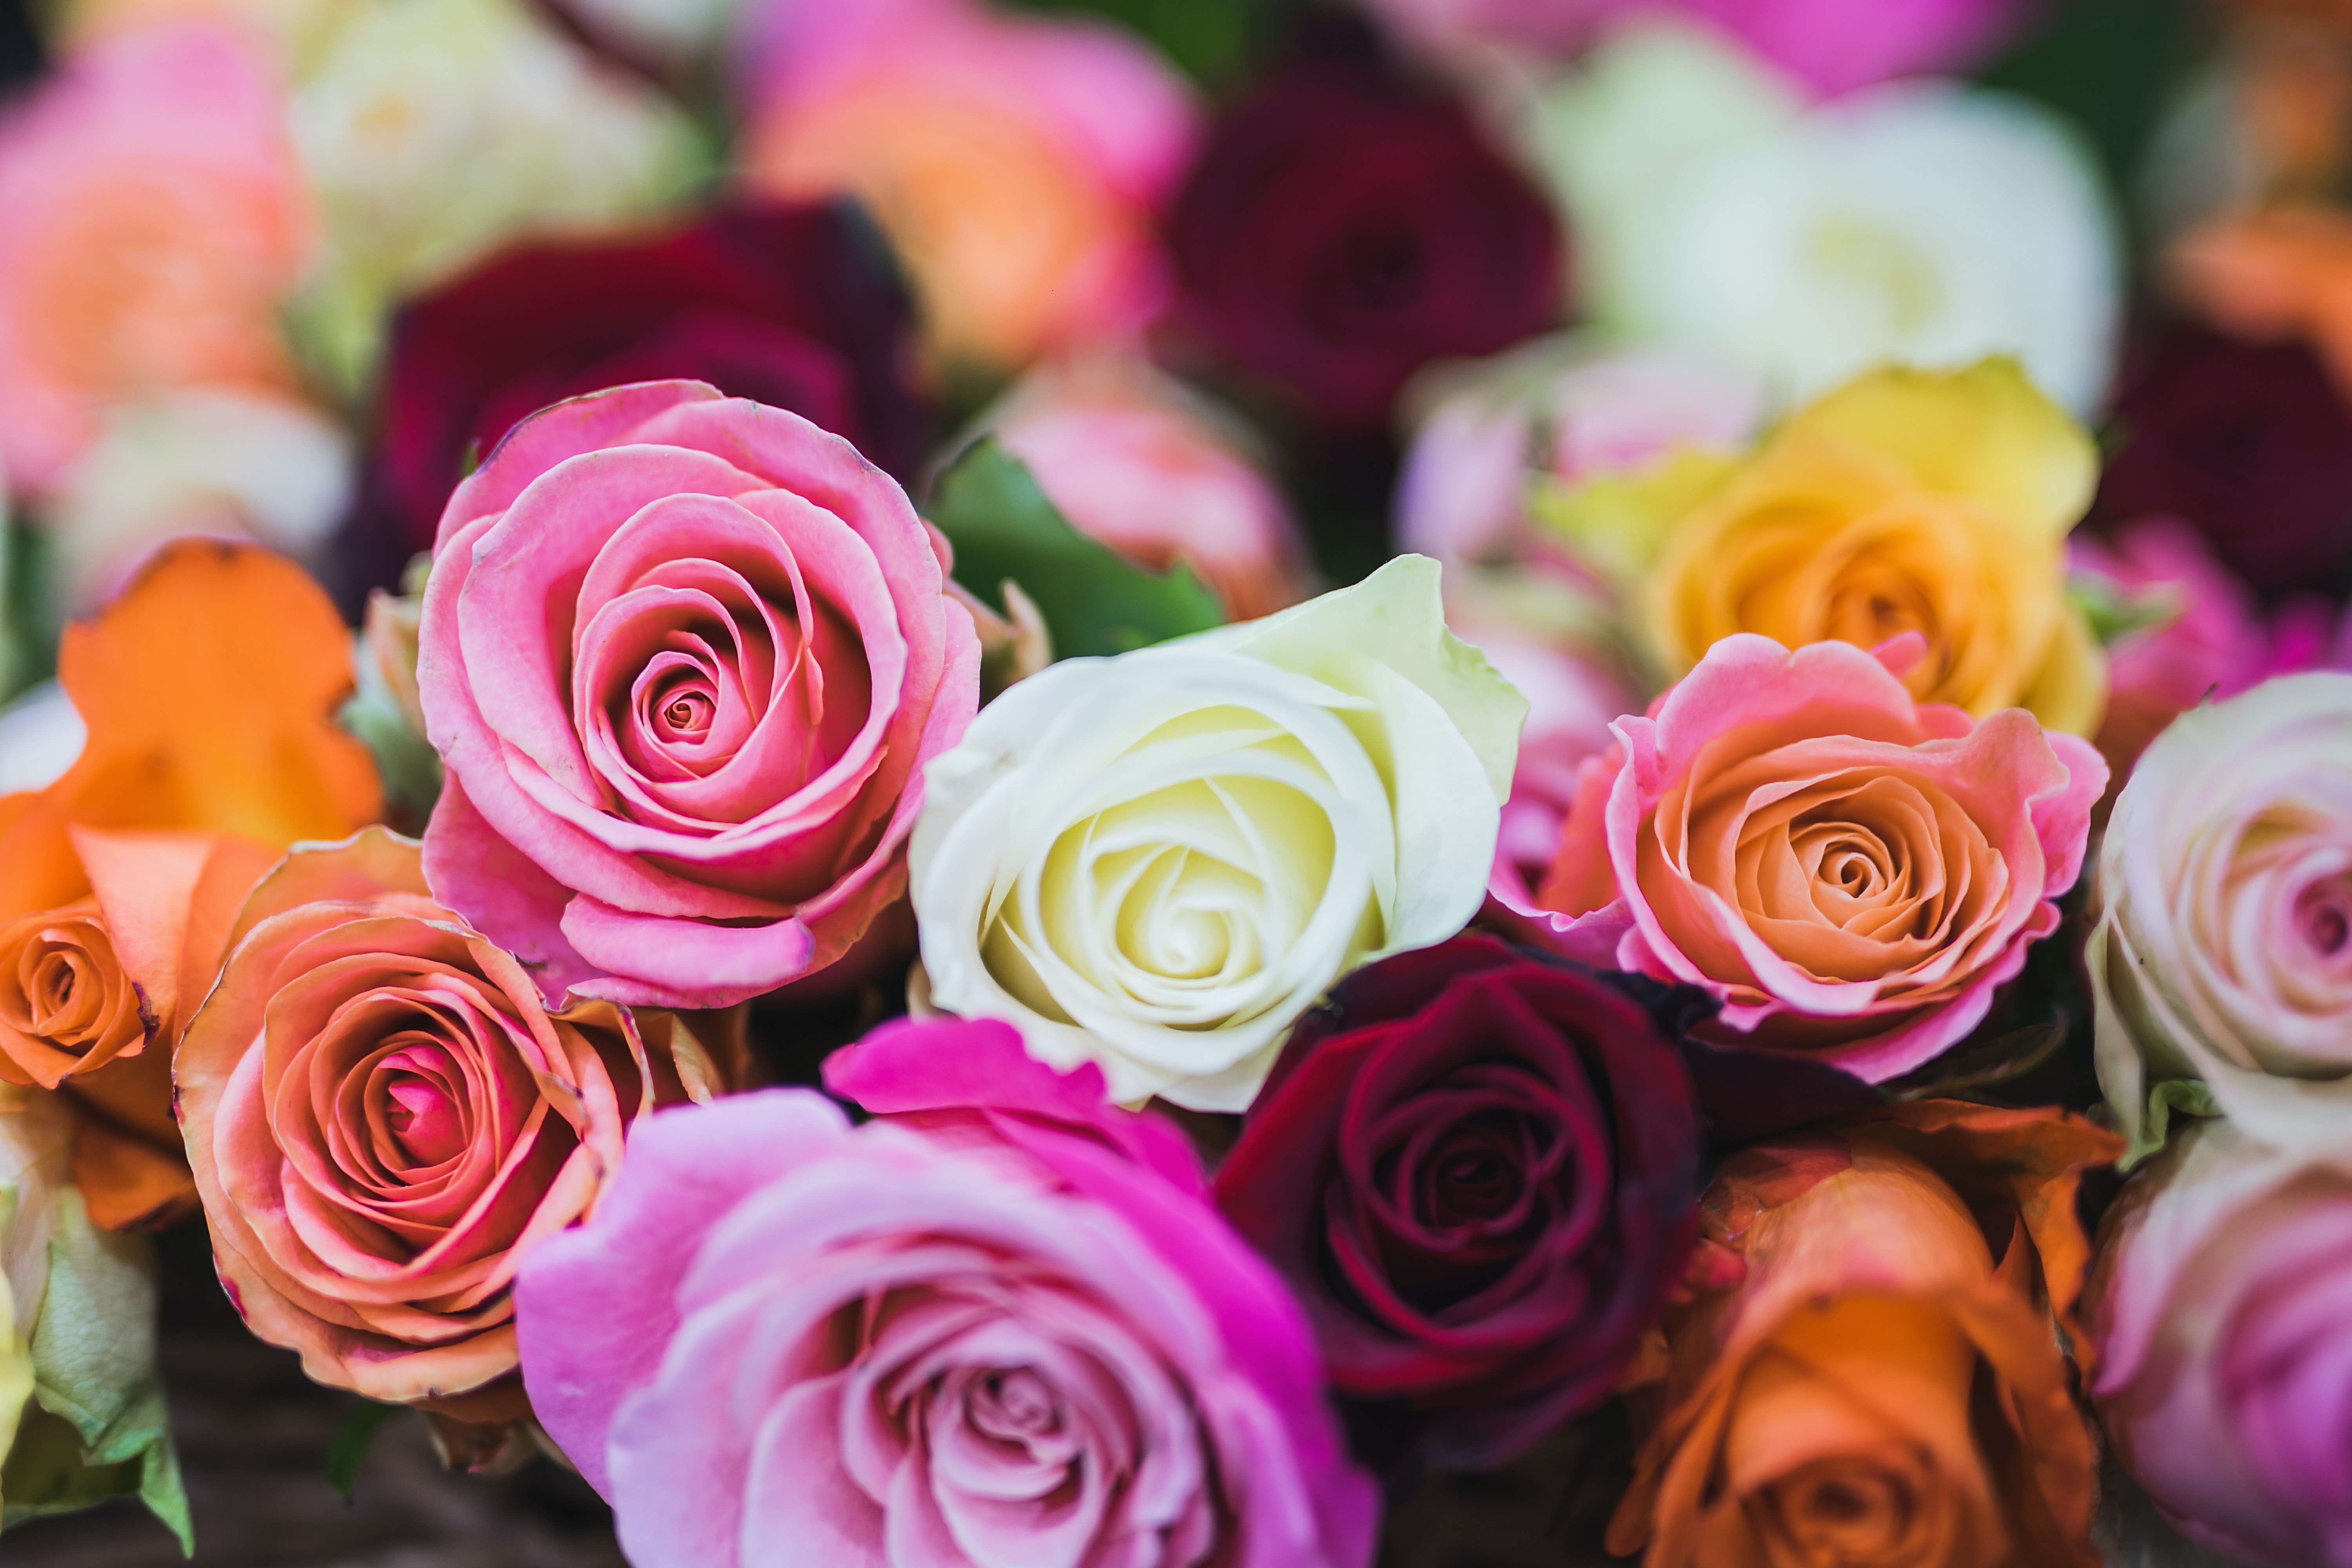 What do all the rose colors signify, anyway?